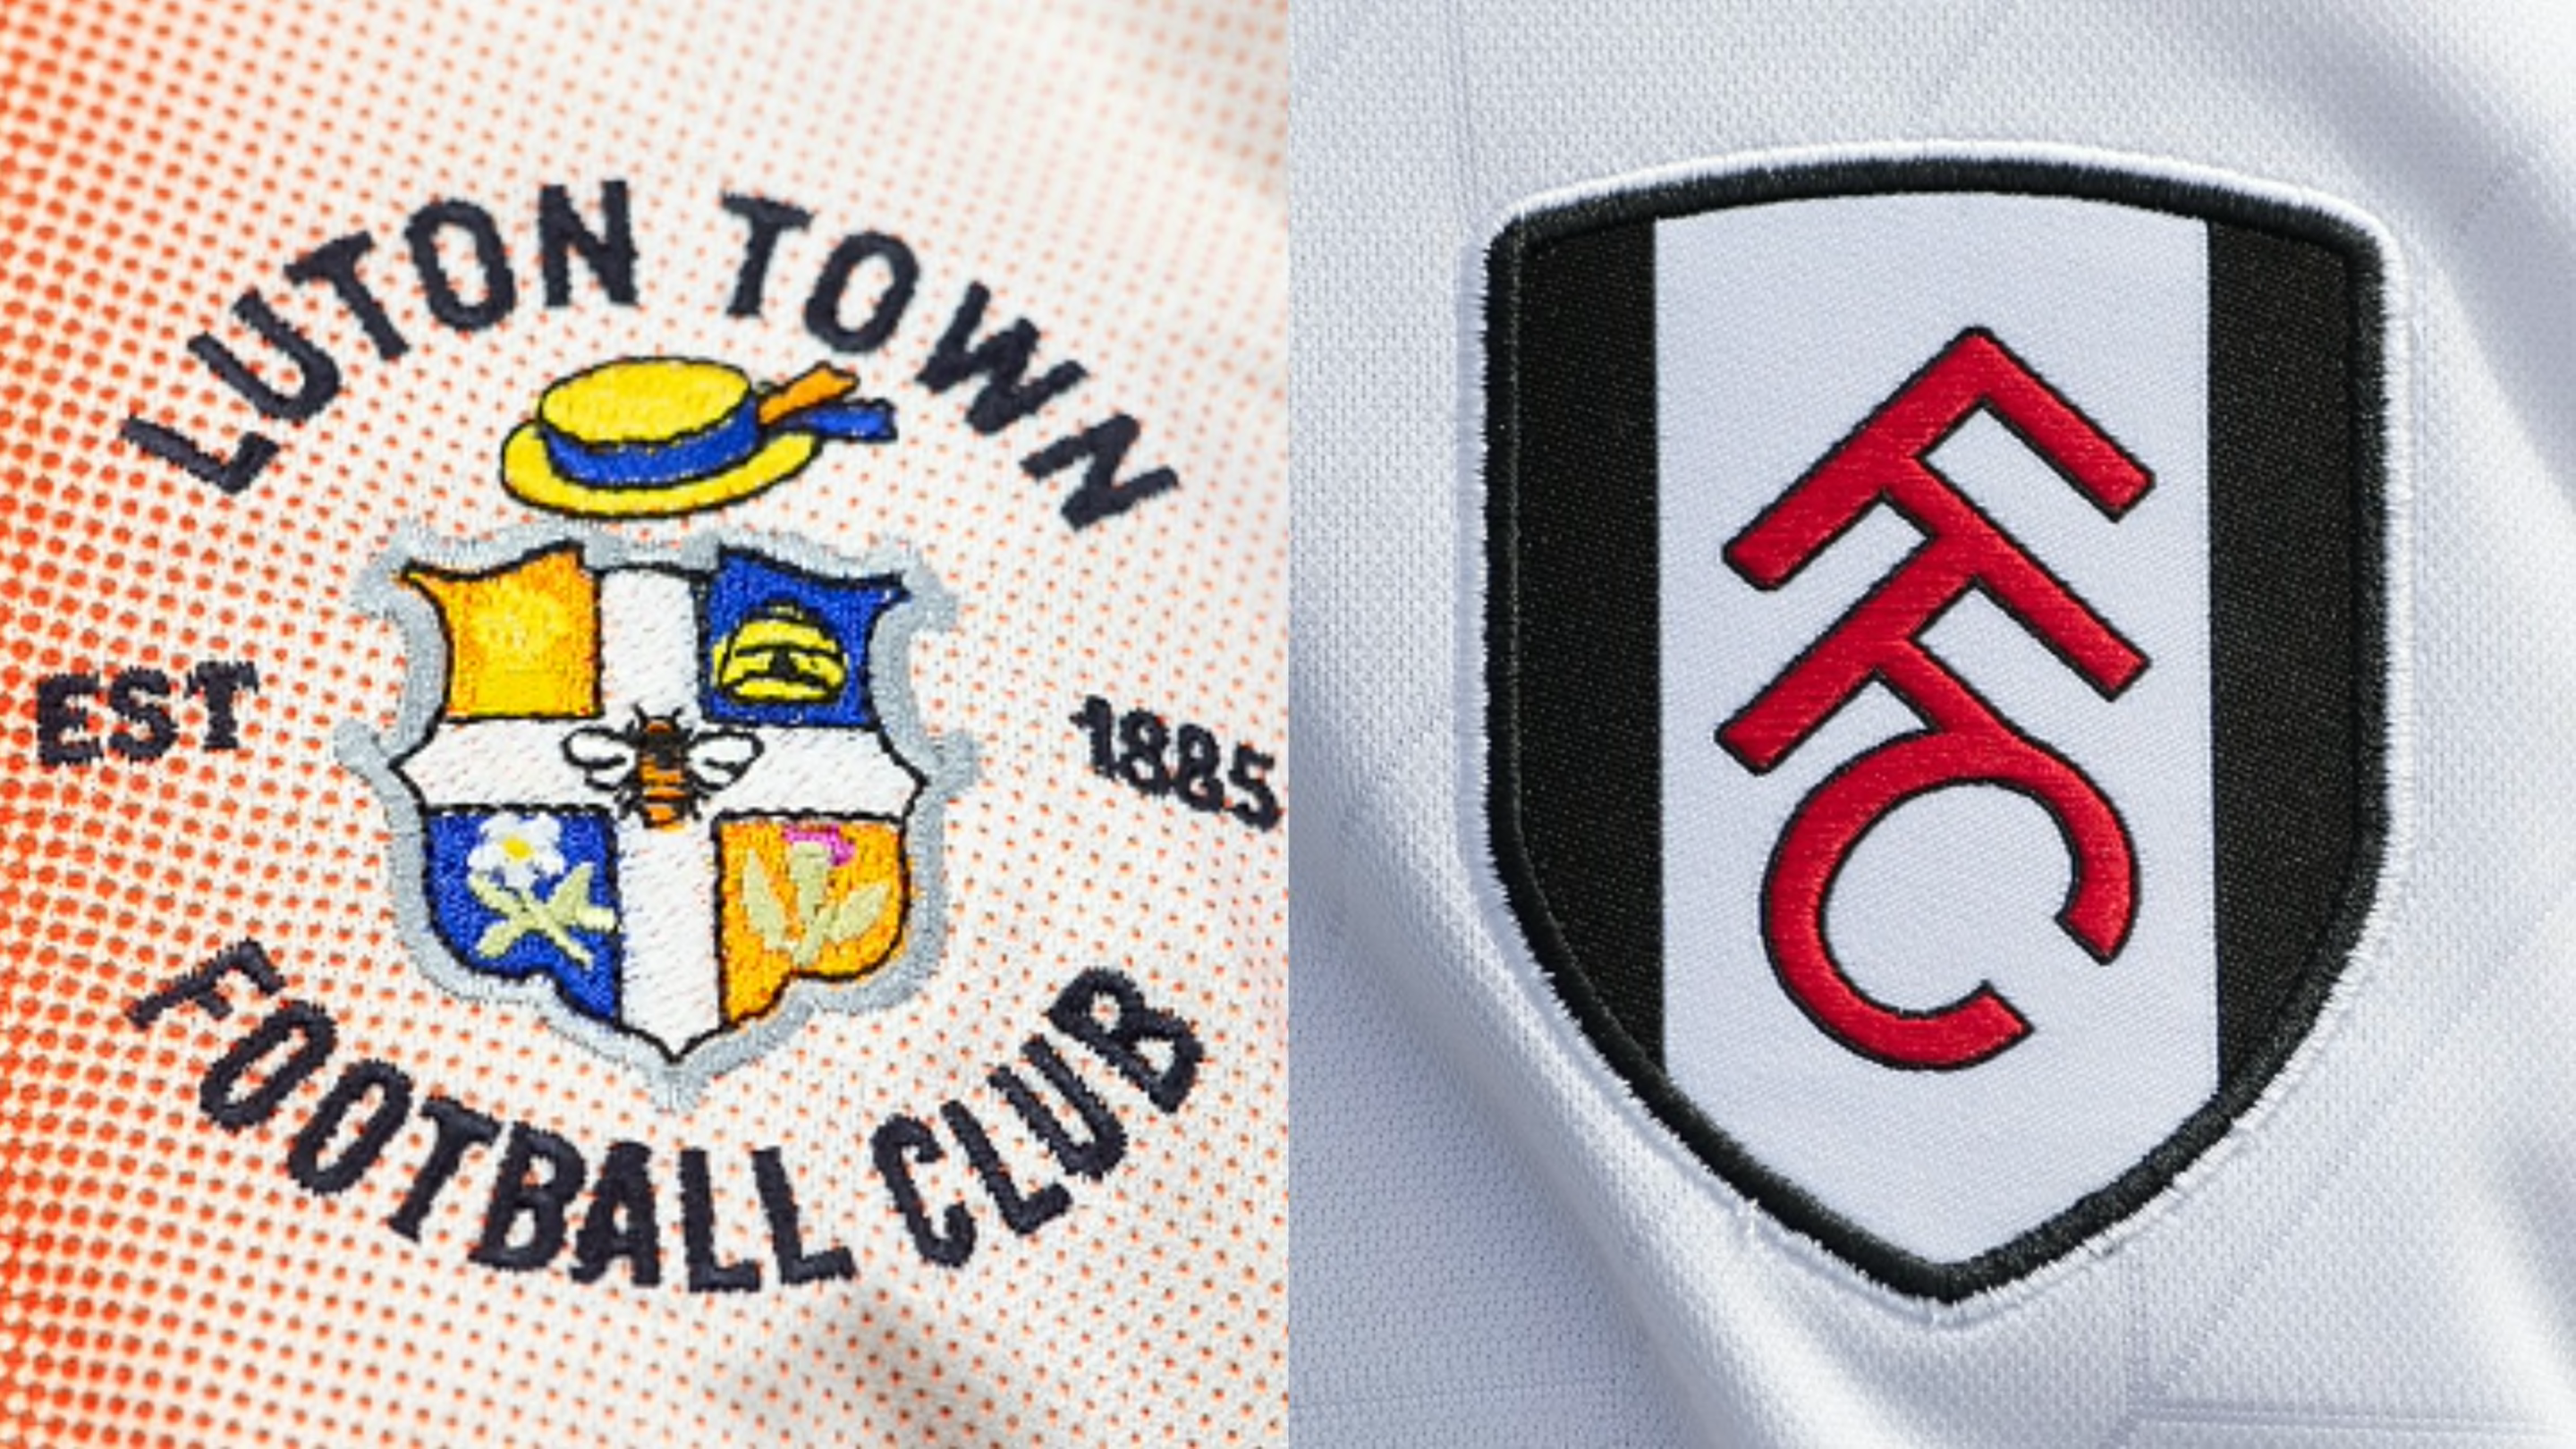 Luton Town vs Fulham: Preview, predictions and lineups